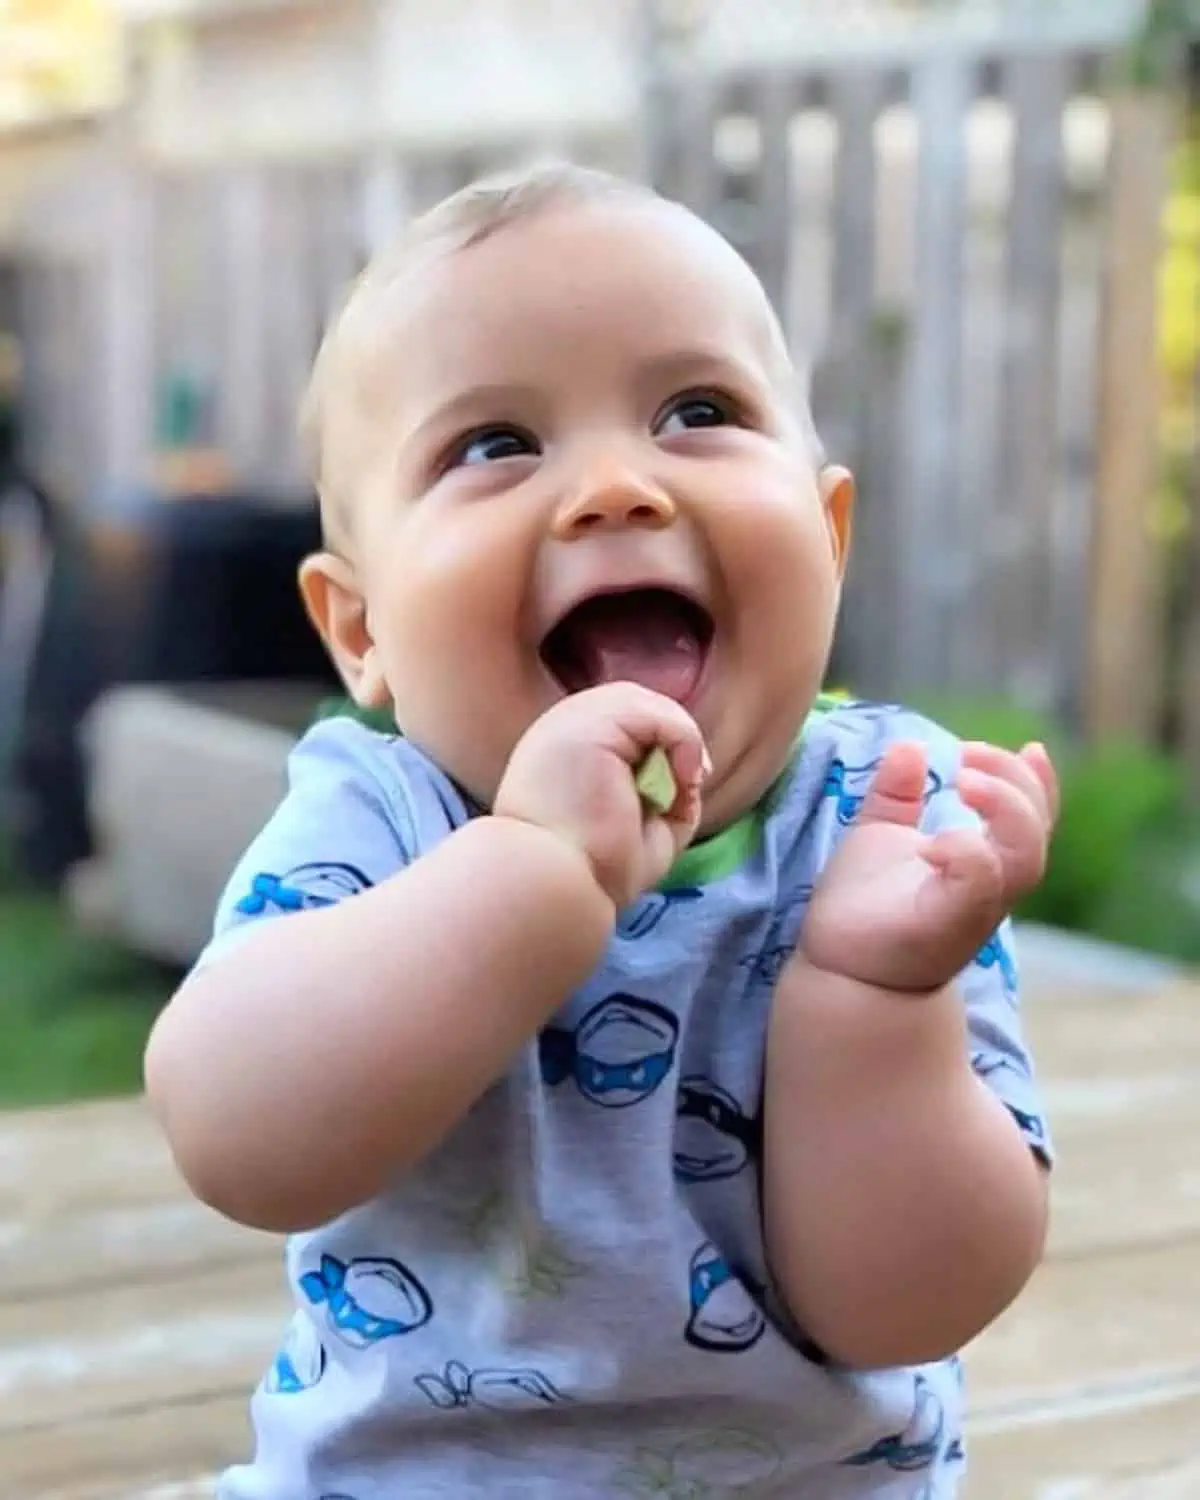 Image of a smiling 12 month old eating a cucumber for a post on dinner ideas for a 12 month old.